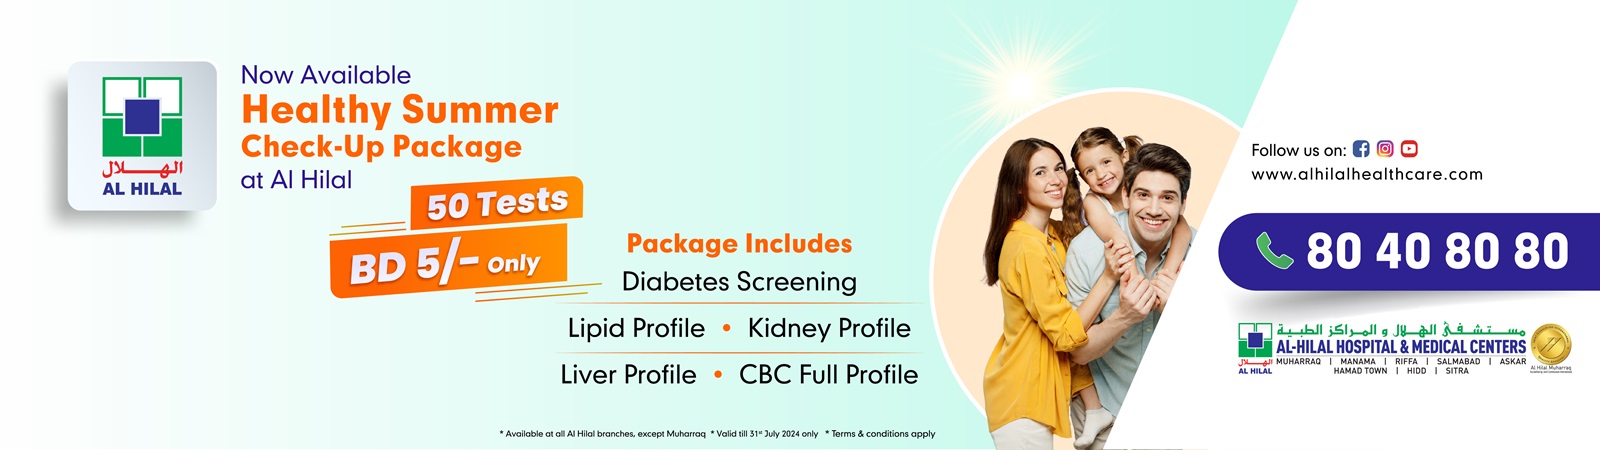 ALH-Desktop-Banner-Healthy-Summer-Check-Up-Package-1600-x-450_1600x450